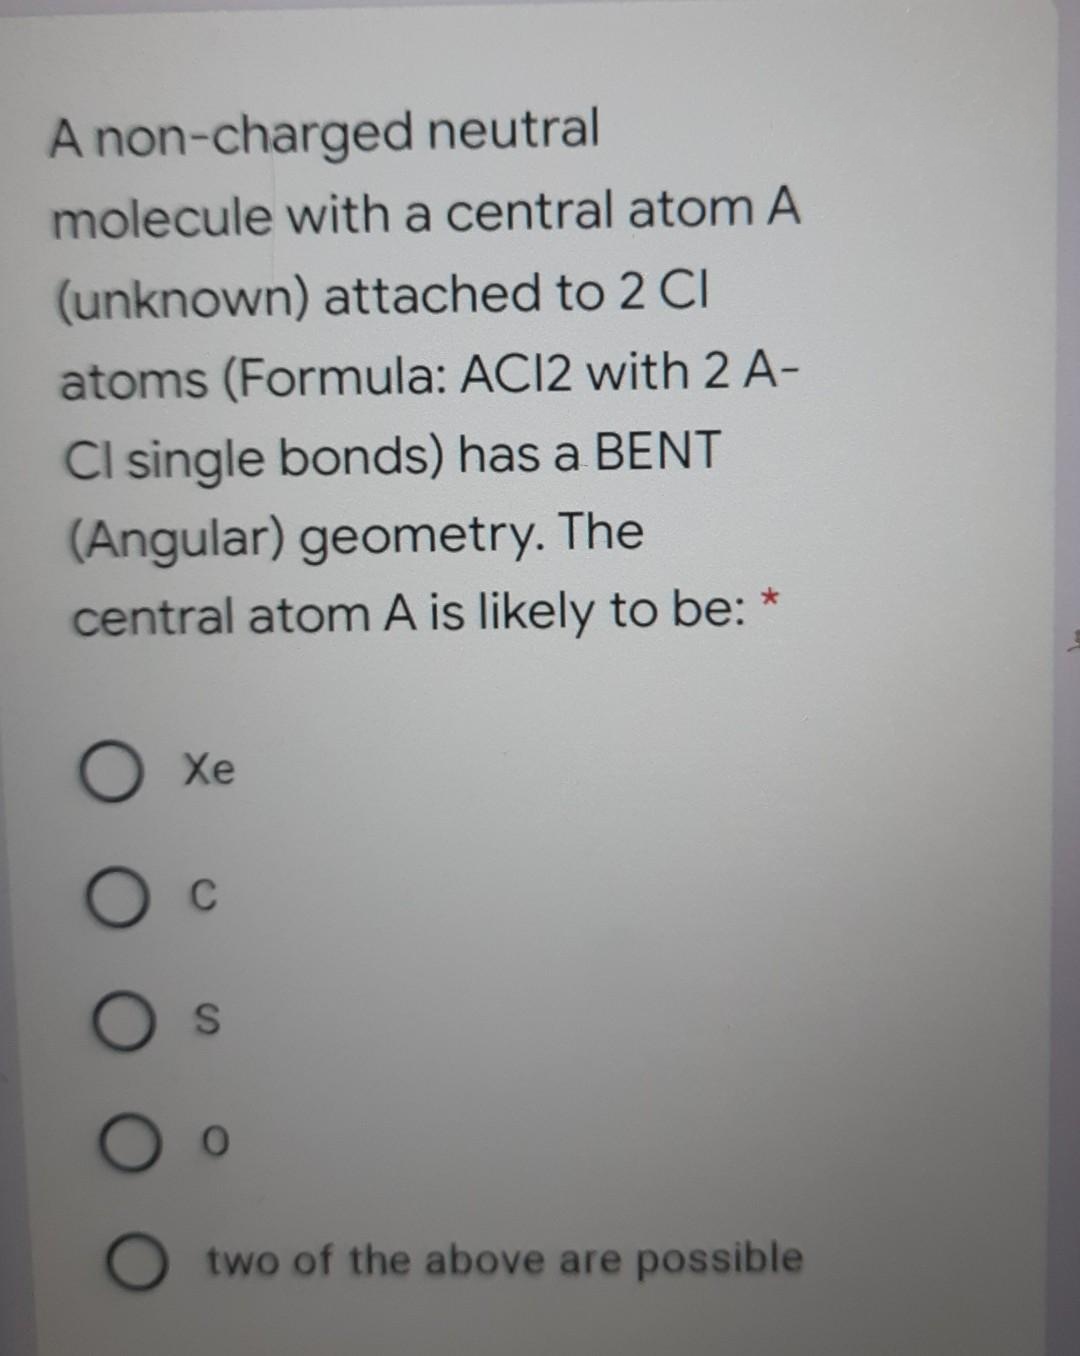 A non-charged neutral
molecule with a central atom A
(unknown) attached to 2 CI
atoms (Formula: ACI2 with 2 A-
CI single bonds) has a BENT
(Angular) geometry. The
central atom A is likely to be: *
Xe
C
O s
O two of the above are possible
